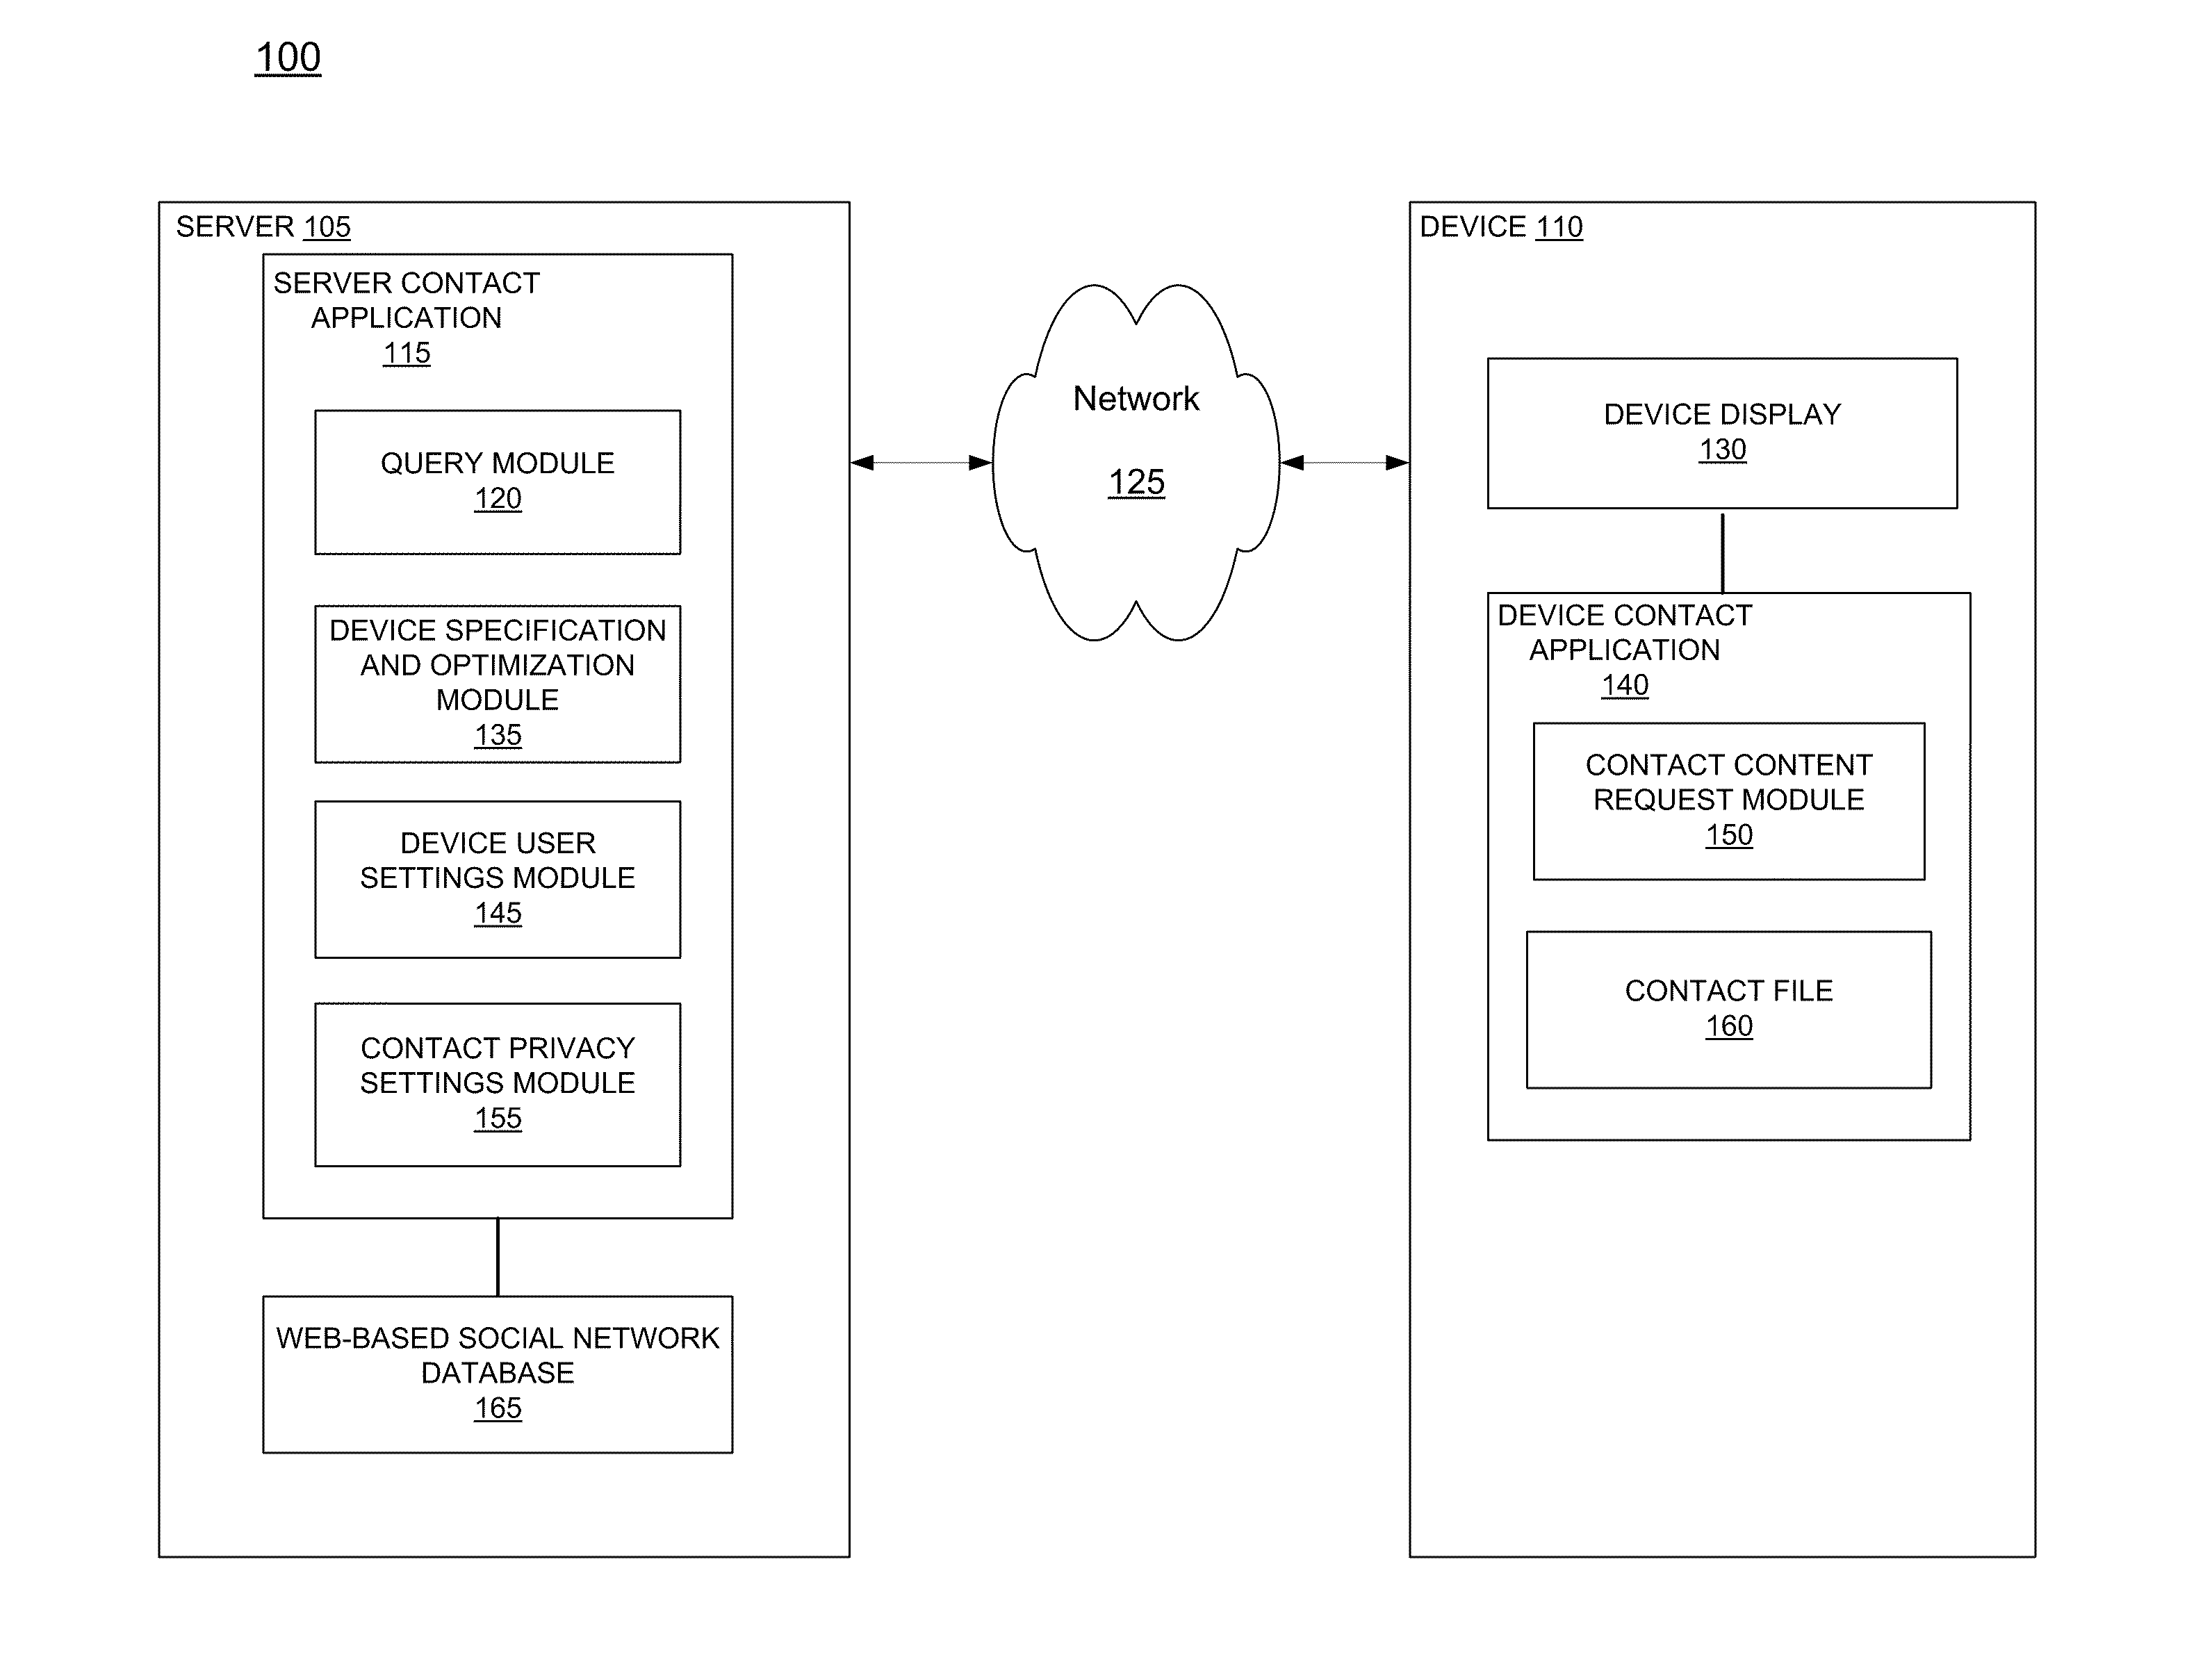 Automatic Population of a Contact File With Contact Content and Expression Content